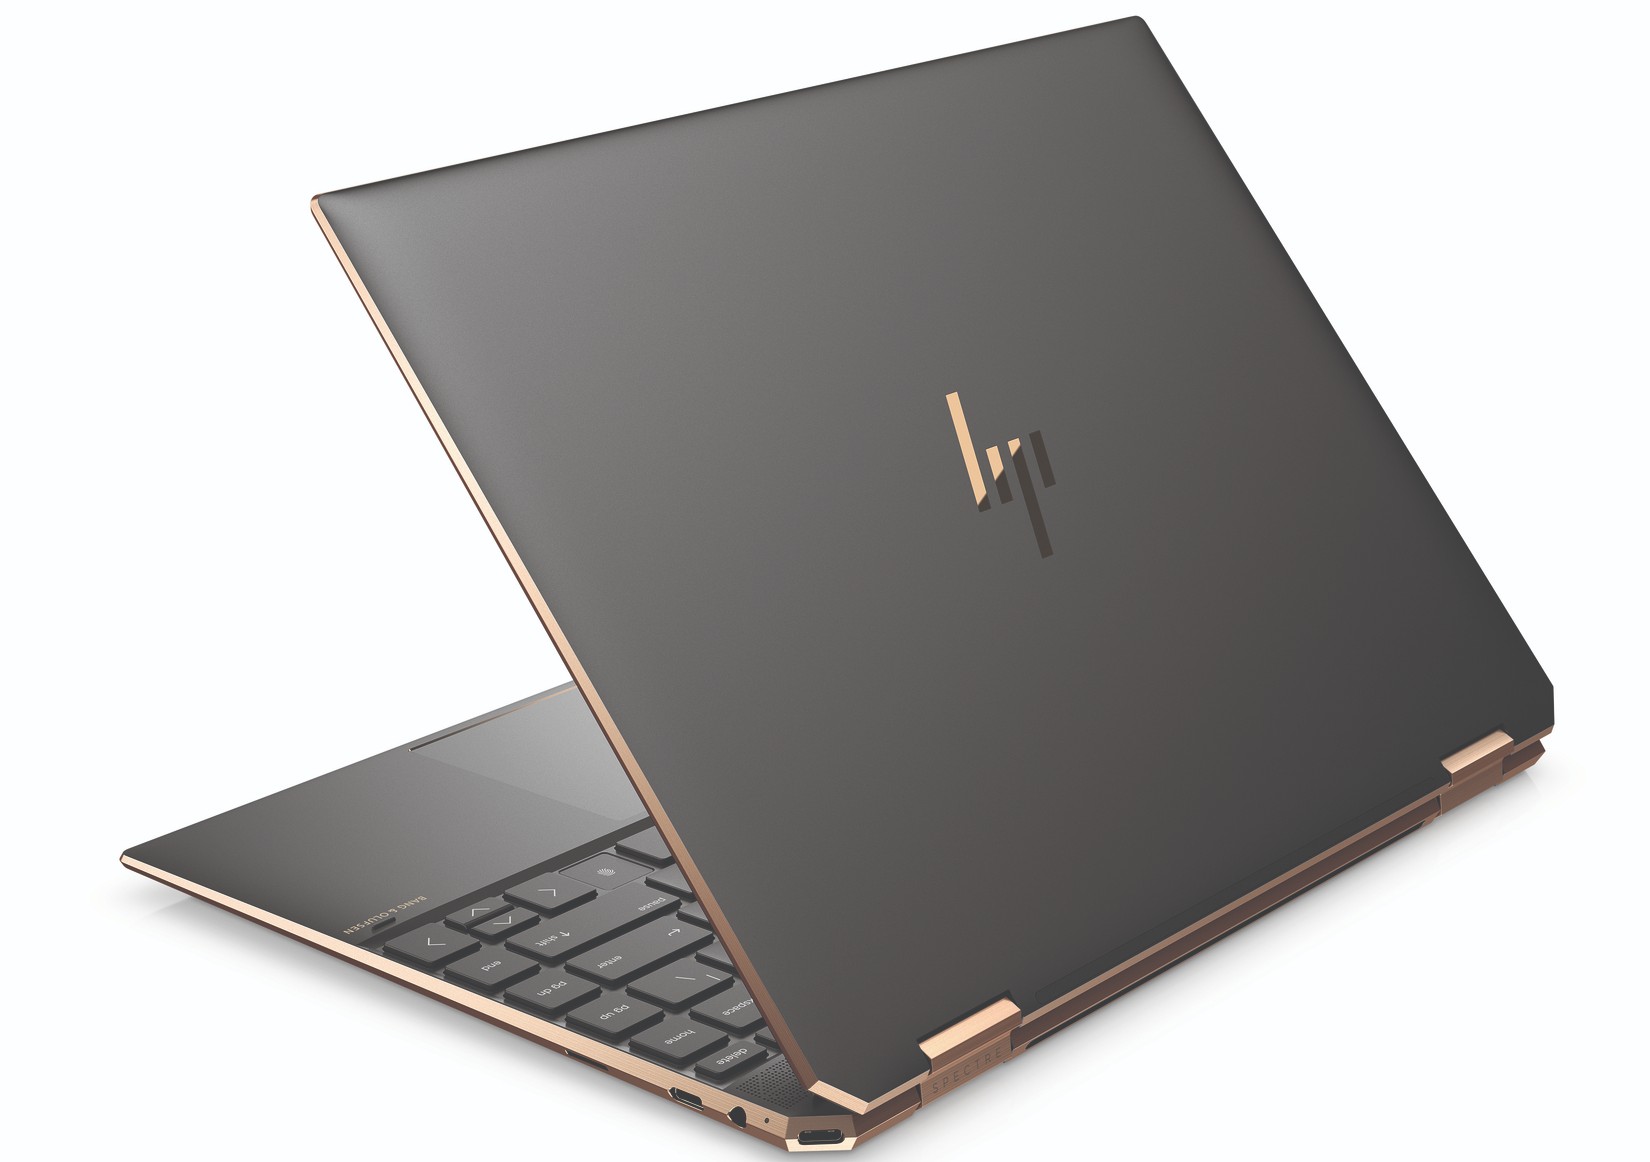 HP Spectre x360 14 luxe laptop revealed with 11th-gen Intel and AI features - SlashGear